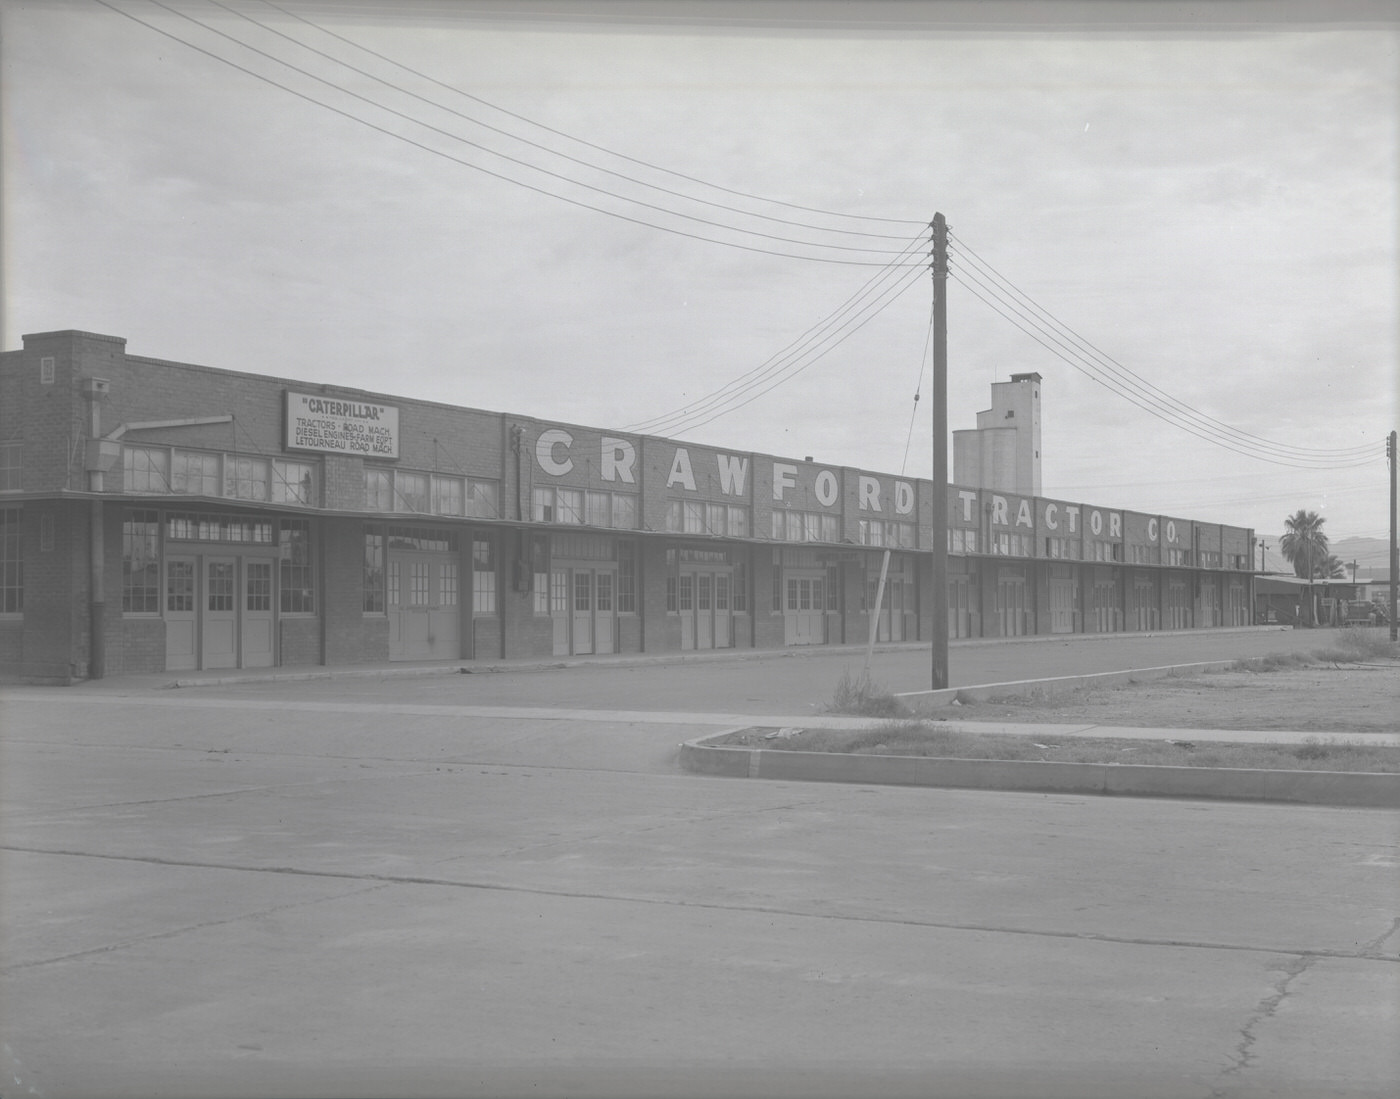 Crawford Tractor Company Building, 1930s